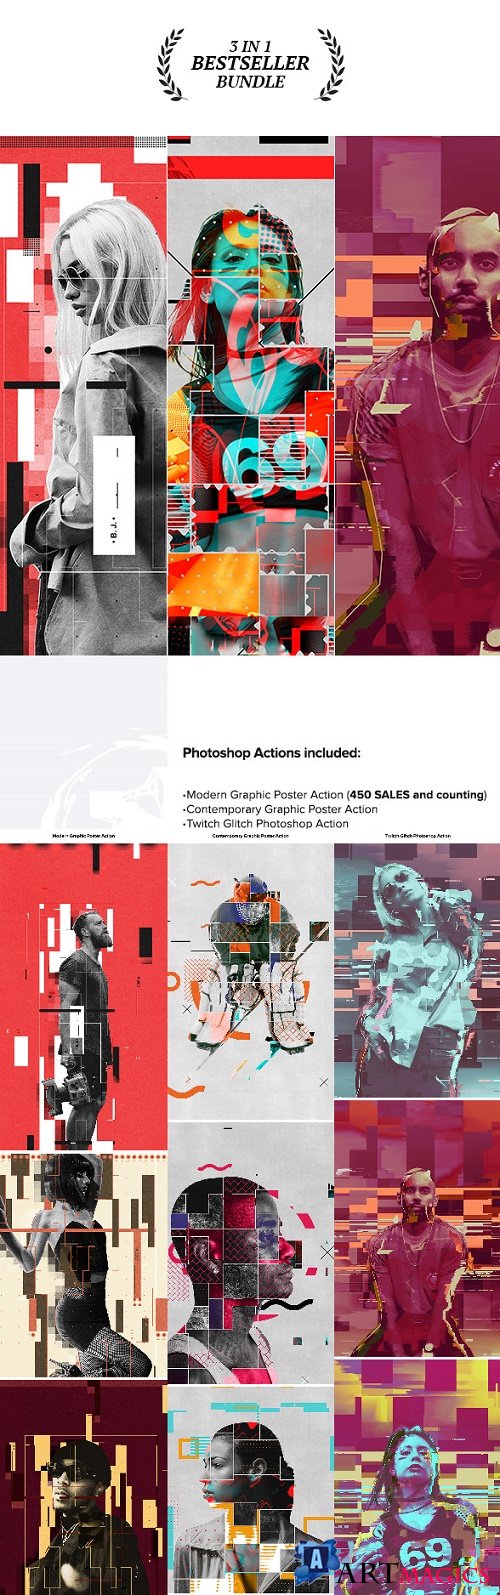 3 in 1 Bestseller Square Graphic Photoshop Actions Bundle - 21708088